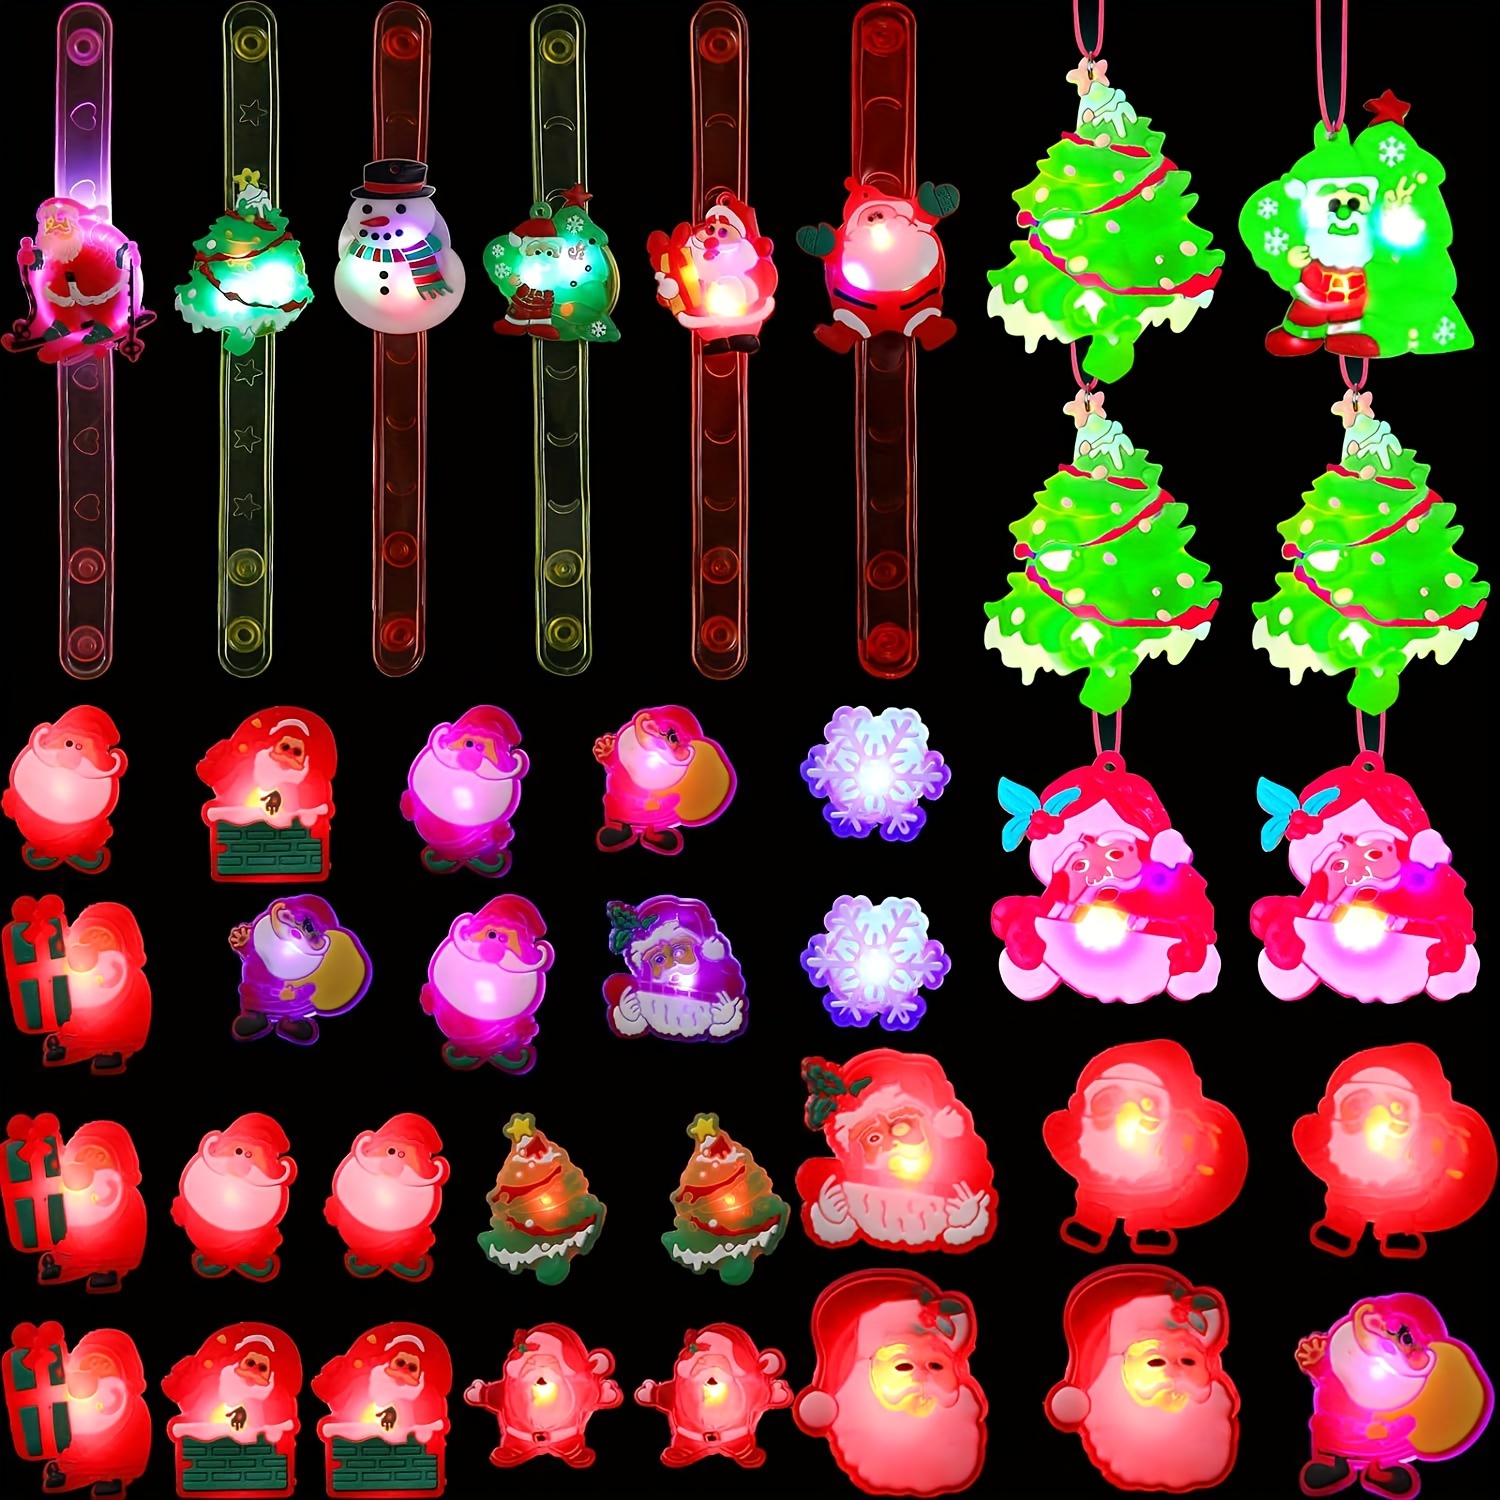 Christmas Party Gift Set Including 6pcs Light-up Christmas